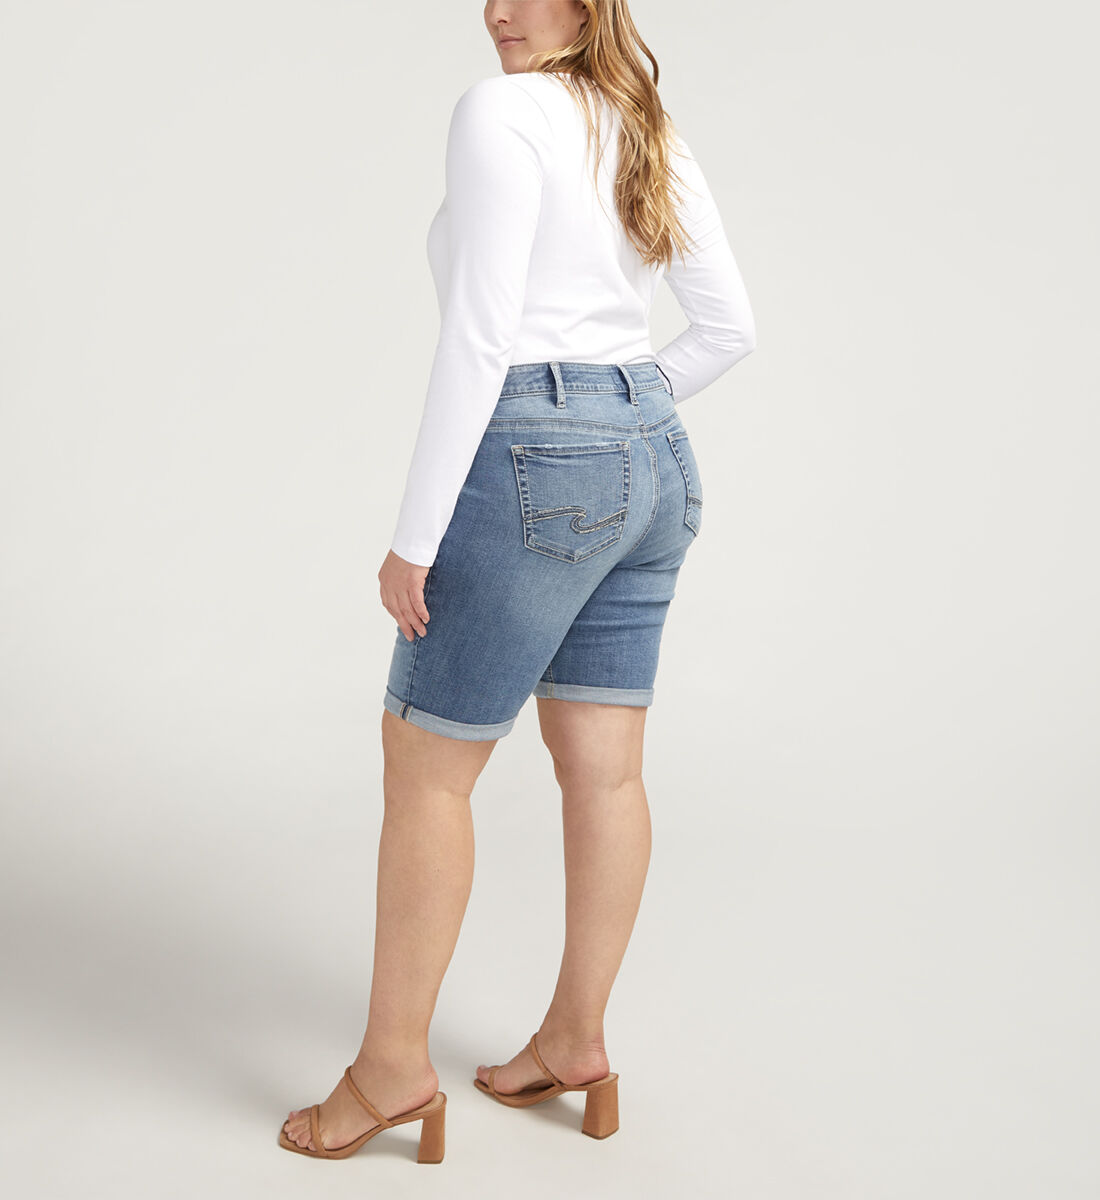 Buy Elyse Mid Rise Bermuda Shorts Plus Size for USD 58.00 | Silver